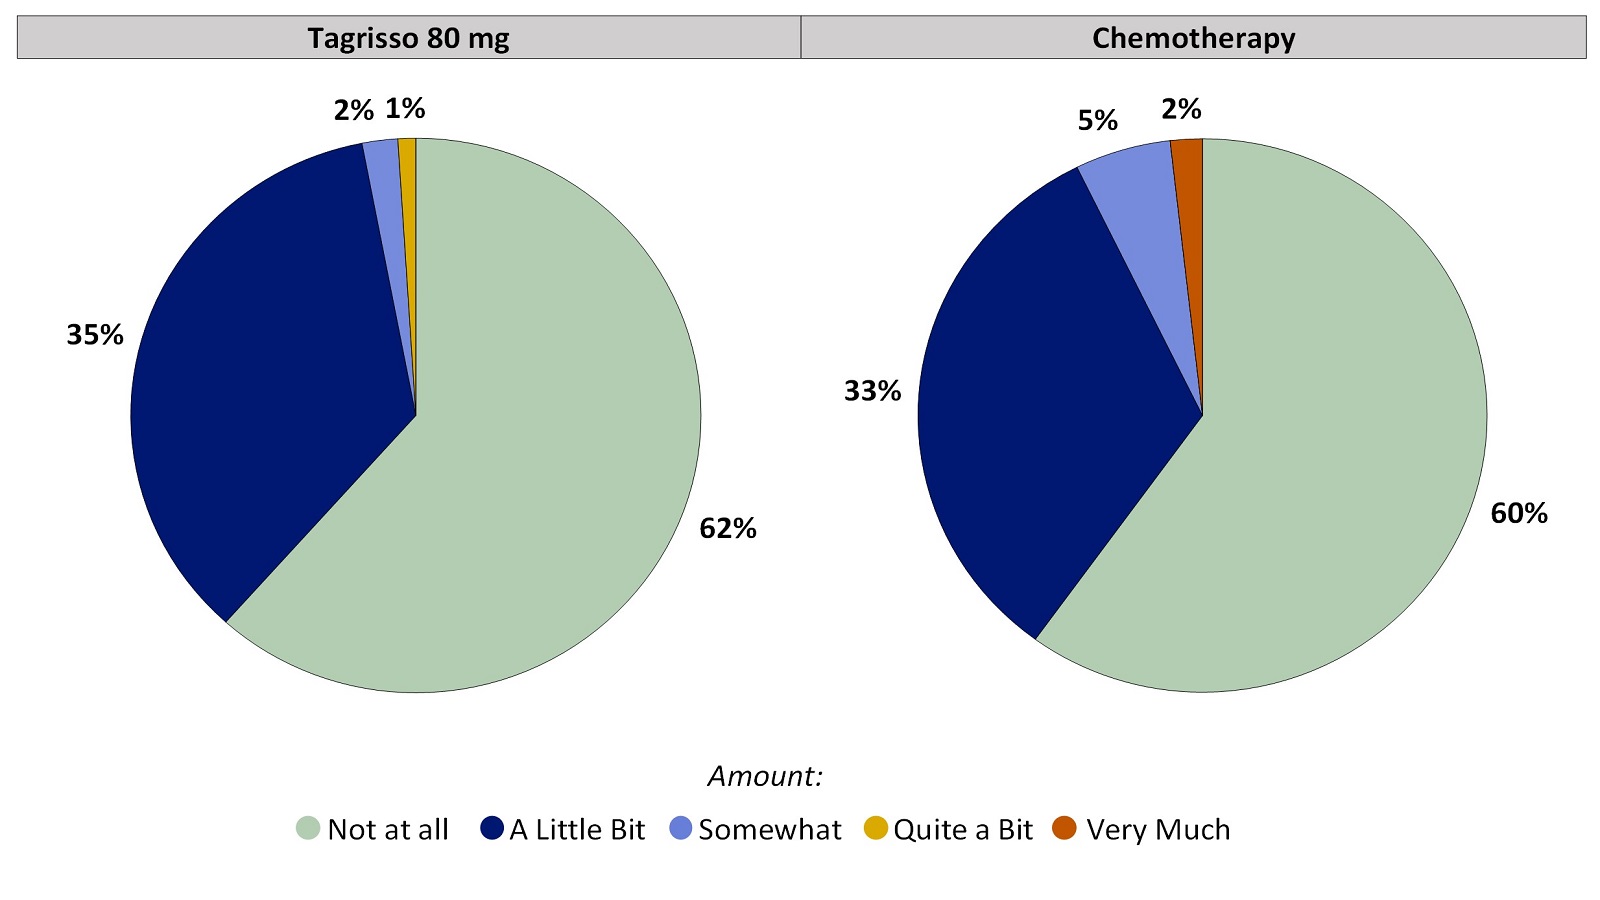 Two pie charts, one for Tagrisso and the other for chemotherapy, summarizing the percentage of patients by worst reported hair loss during the first 24 weeks of the clinical trial. In the Tagrisso arm, Not at all (62%), A little bit (35%), Somewhat (2%), Quite a bit (1%) and Very much (0%). In the chemotherapy arm, Not at all (60%), A little bit (33%), Somewhat (5%), Quite a bit (0%) and Very much (2%).